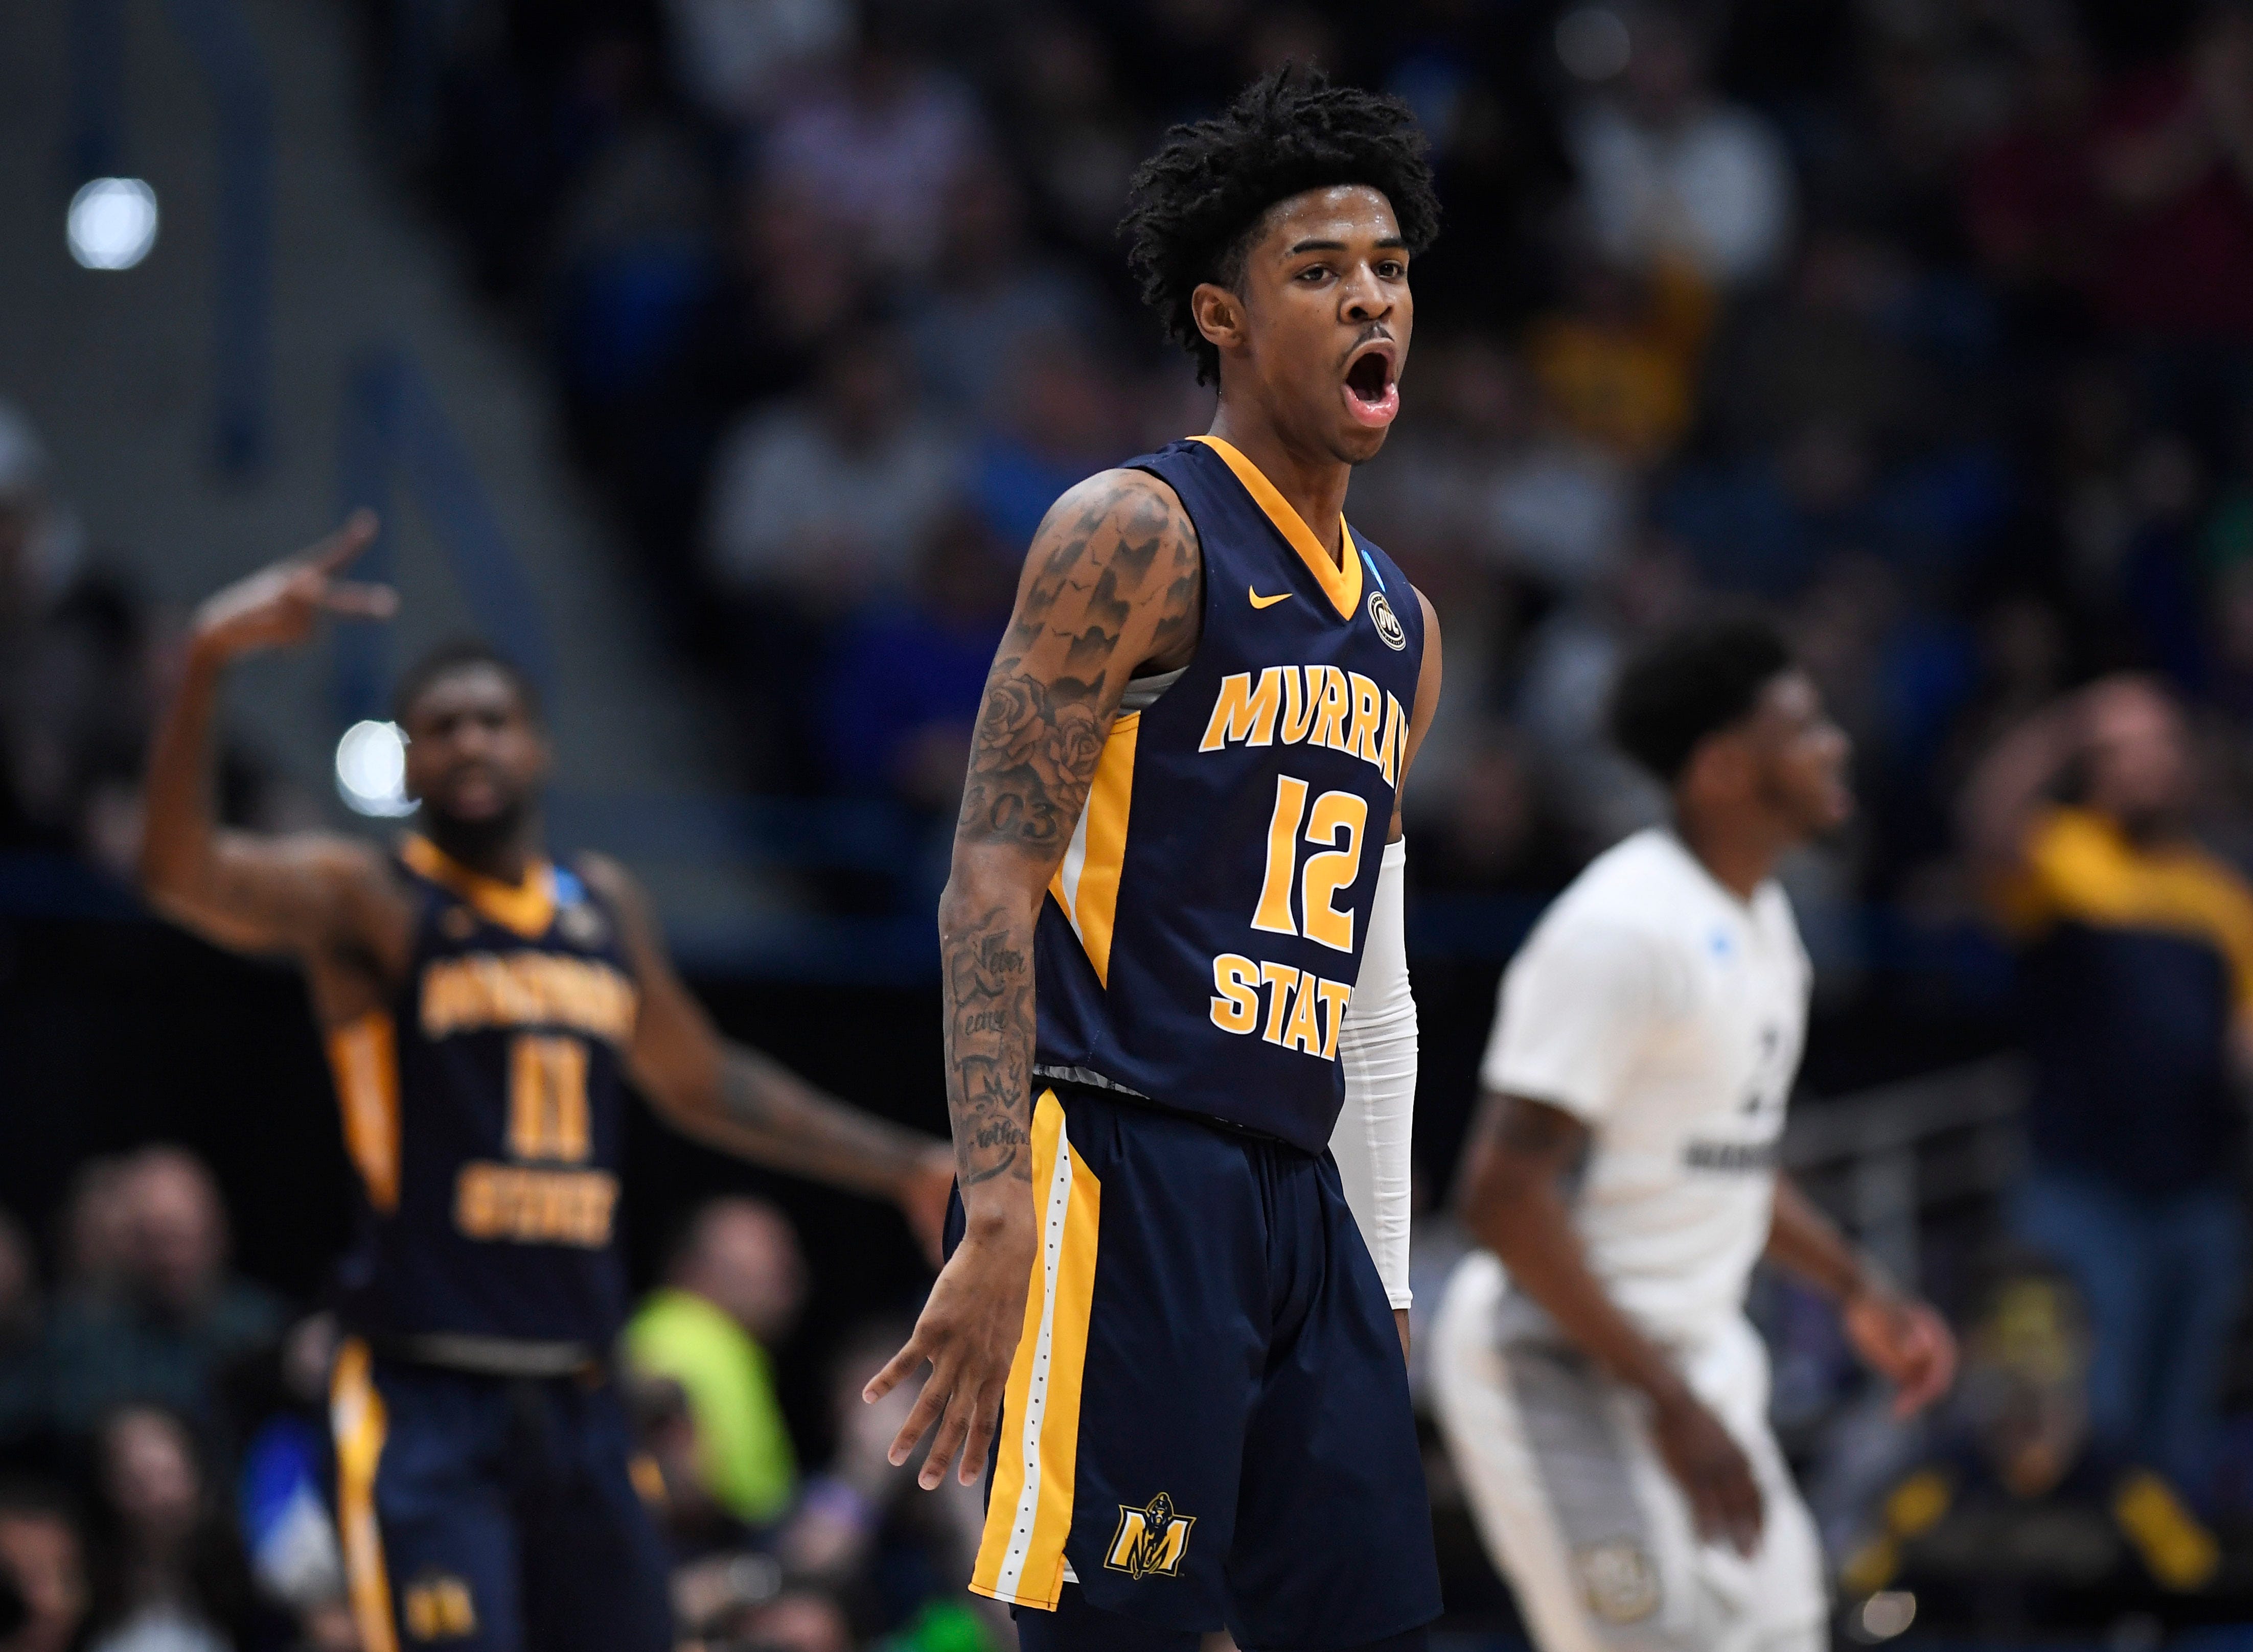 2. Memphis Grizzlies: Ja Morant, G, Murray State. As solid as Williamson is as the No. 1 pick, Morant also is cemented as the second selection. The Grizzlies are focusing on Morant to take the reins from Mike Conley, who still could be dealt to add pieces ahead of the season to help build on their solid nucleus.